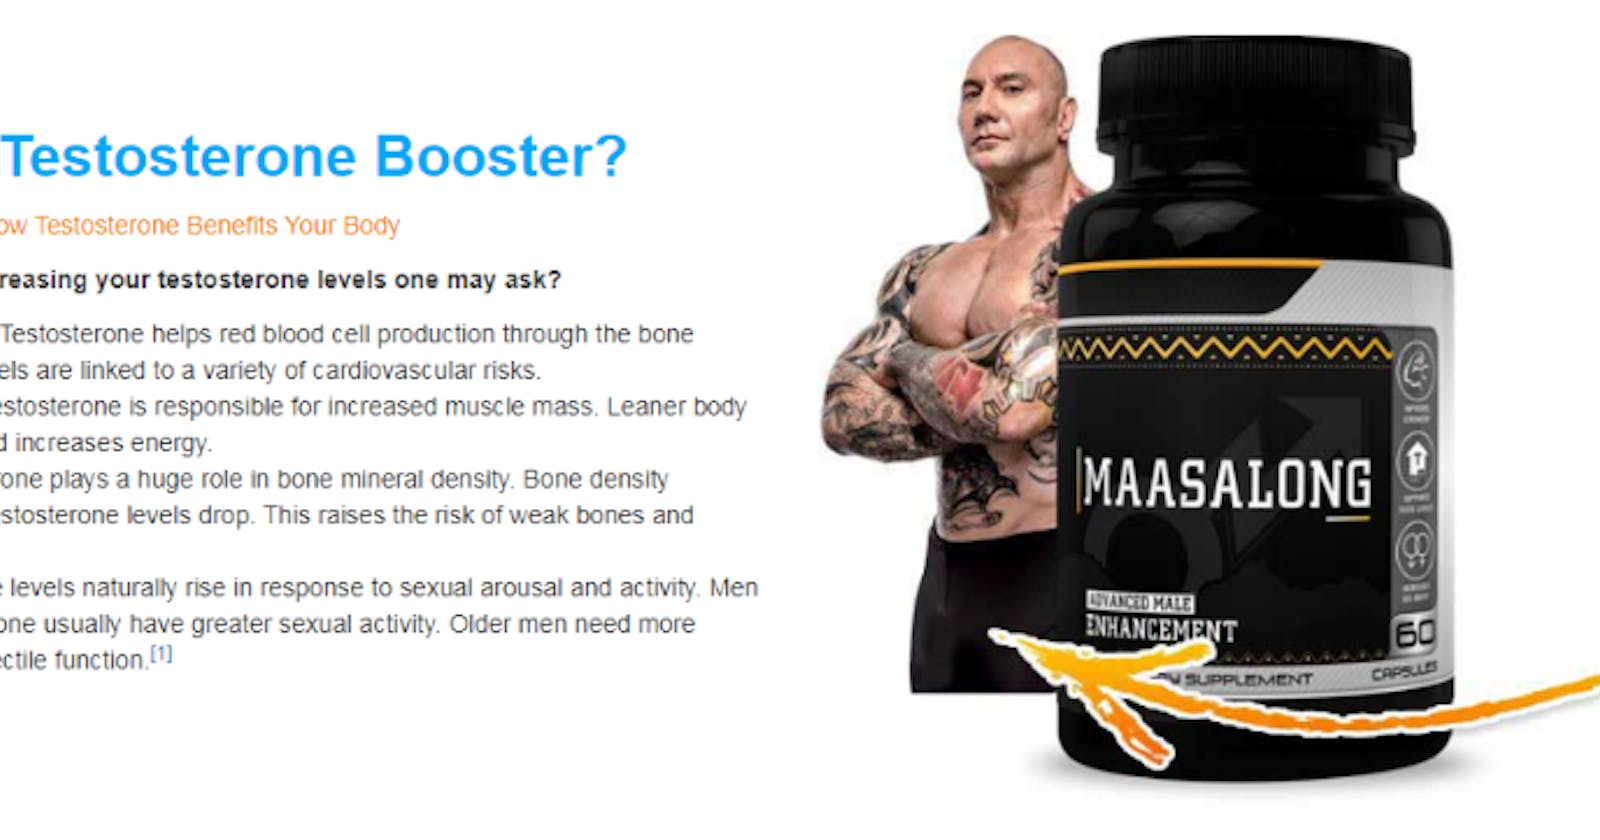 Maasalong Male Enhancement Reviews Improve Sexual Power, Does It Safe? Price!